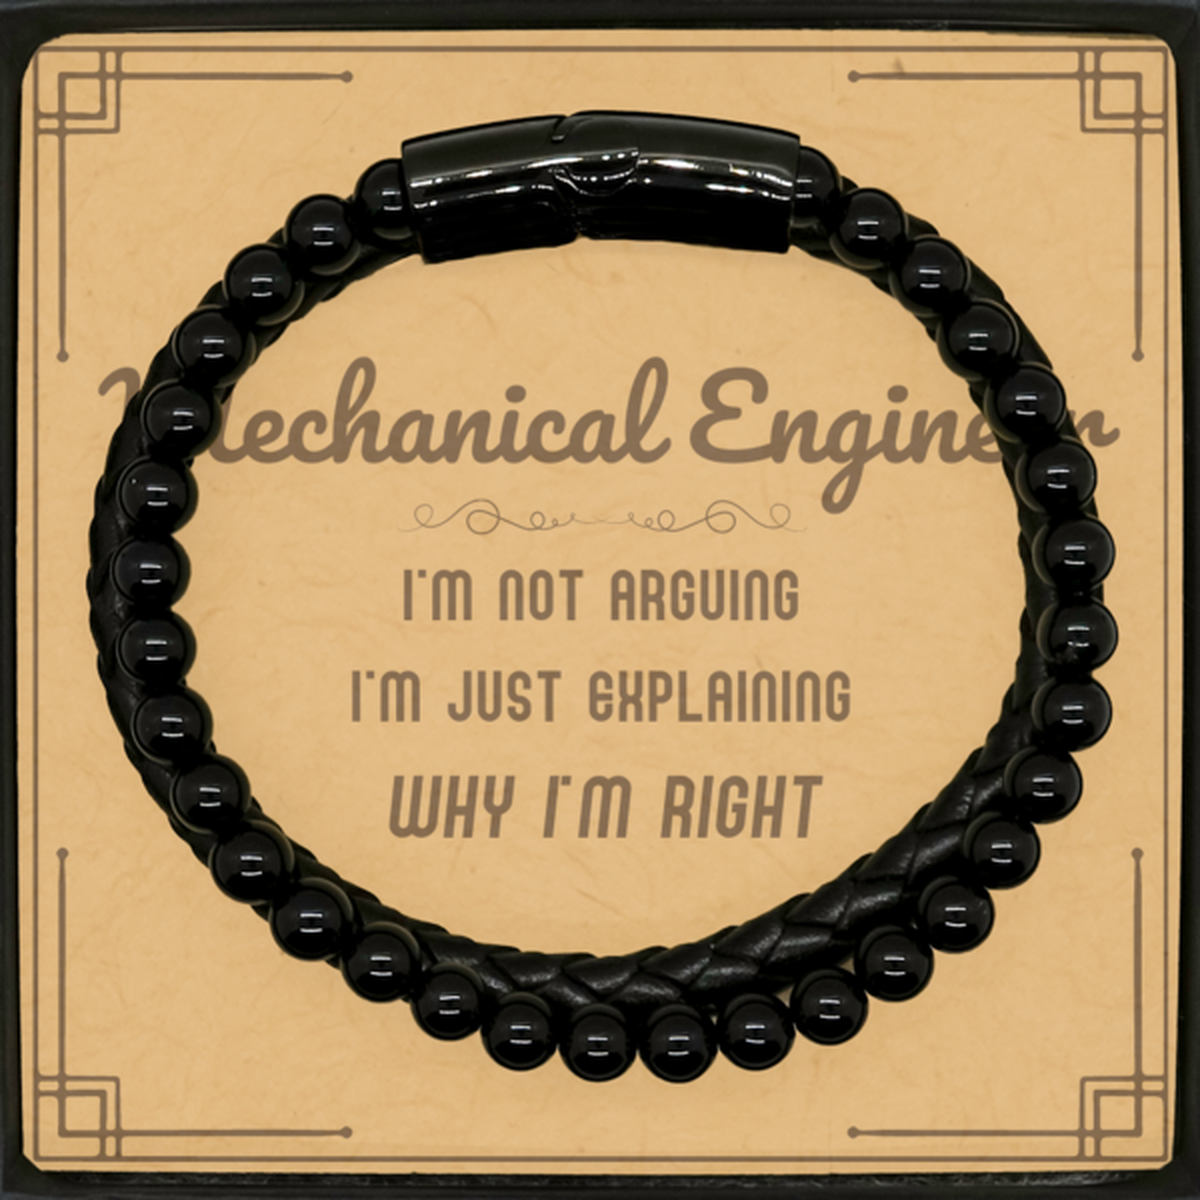 Mechanical Engineer I'm not Arguing. I'm Just Explaining Why I'm RIGHT Stone Leather Bracelets, Funny Saying Quote Mechanical Engineer Gifts For Mechanical Engineer Message Card Graduation Birthday Christmas Gifts for Men Women Coworker